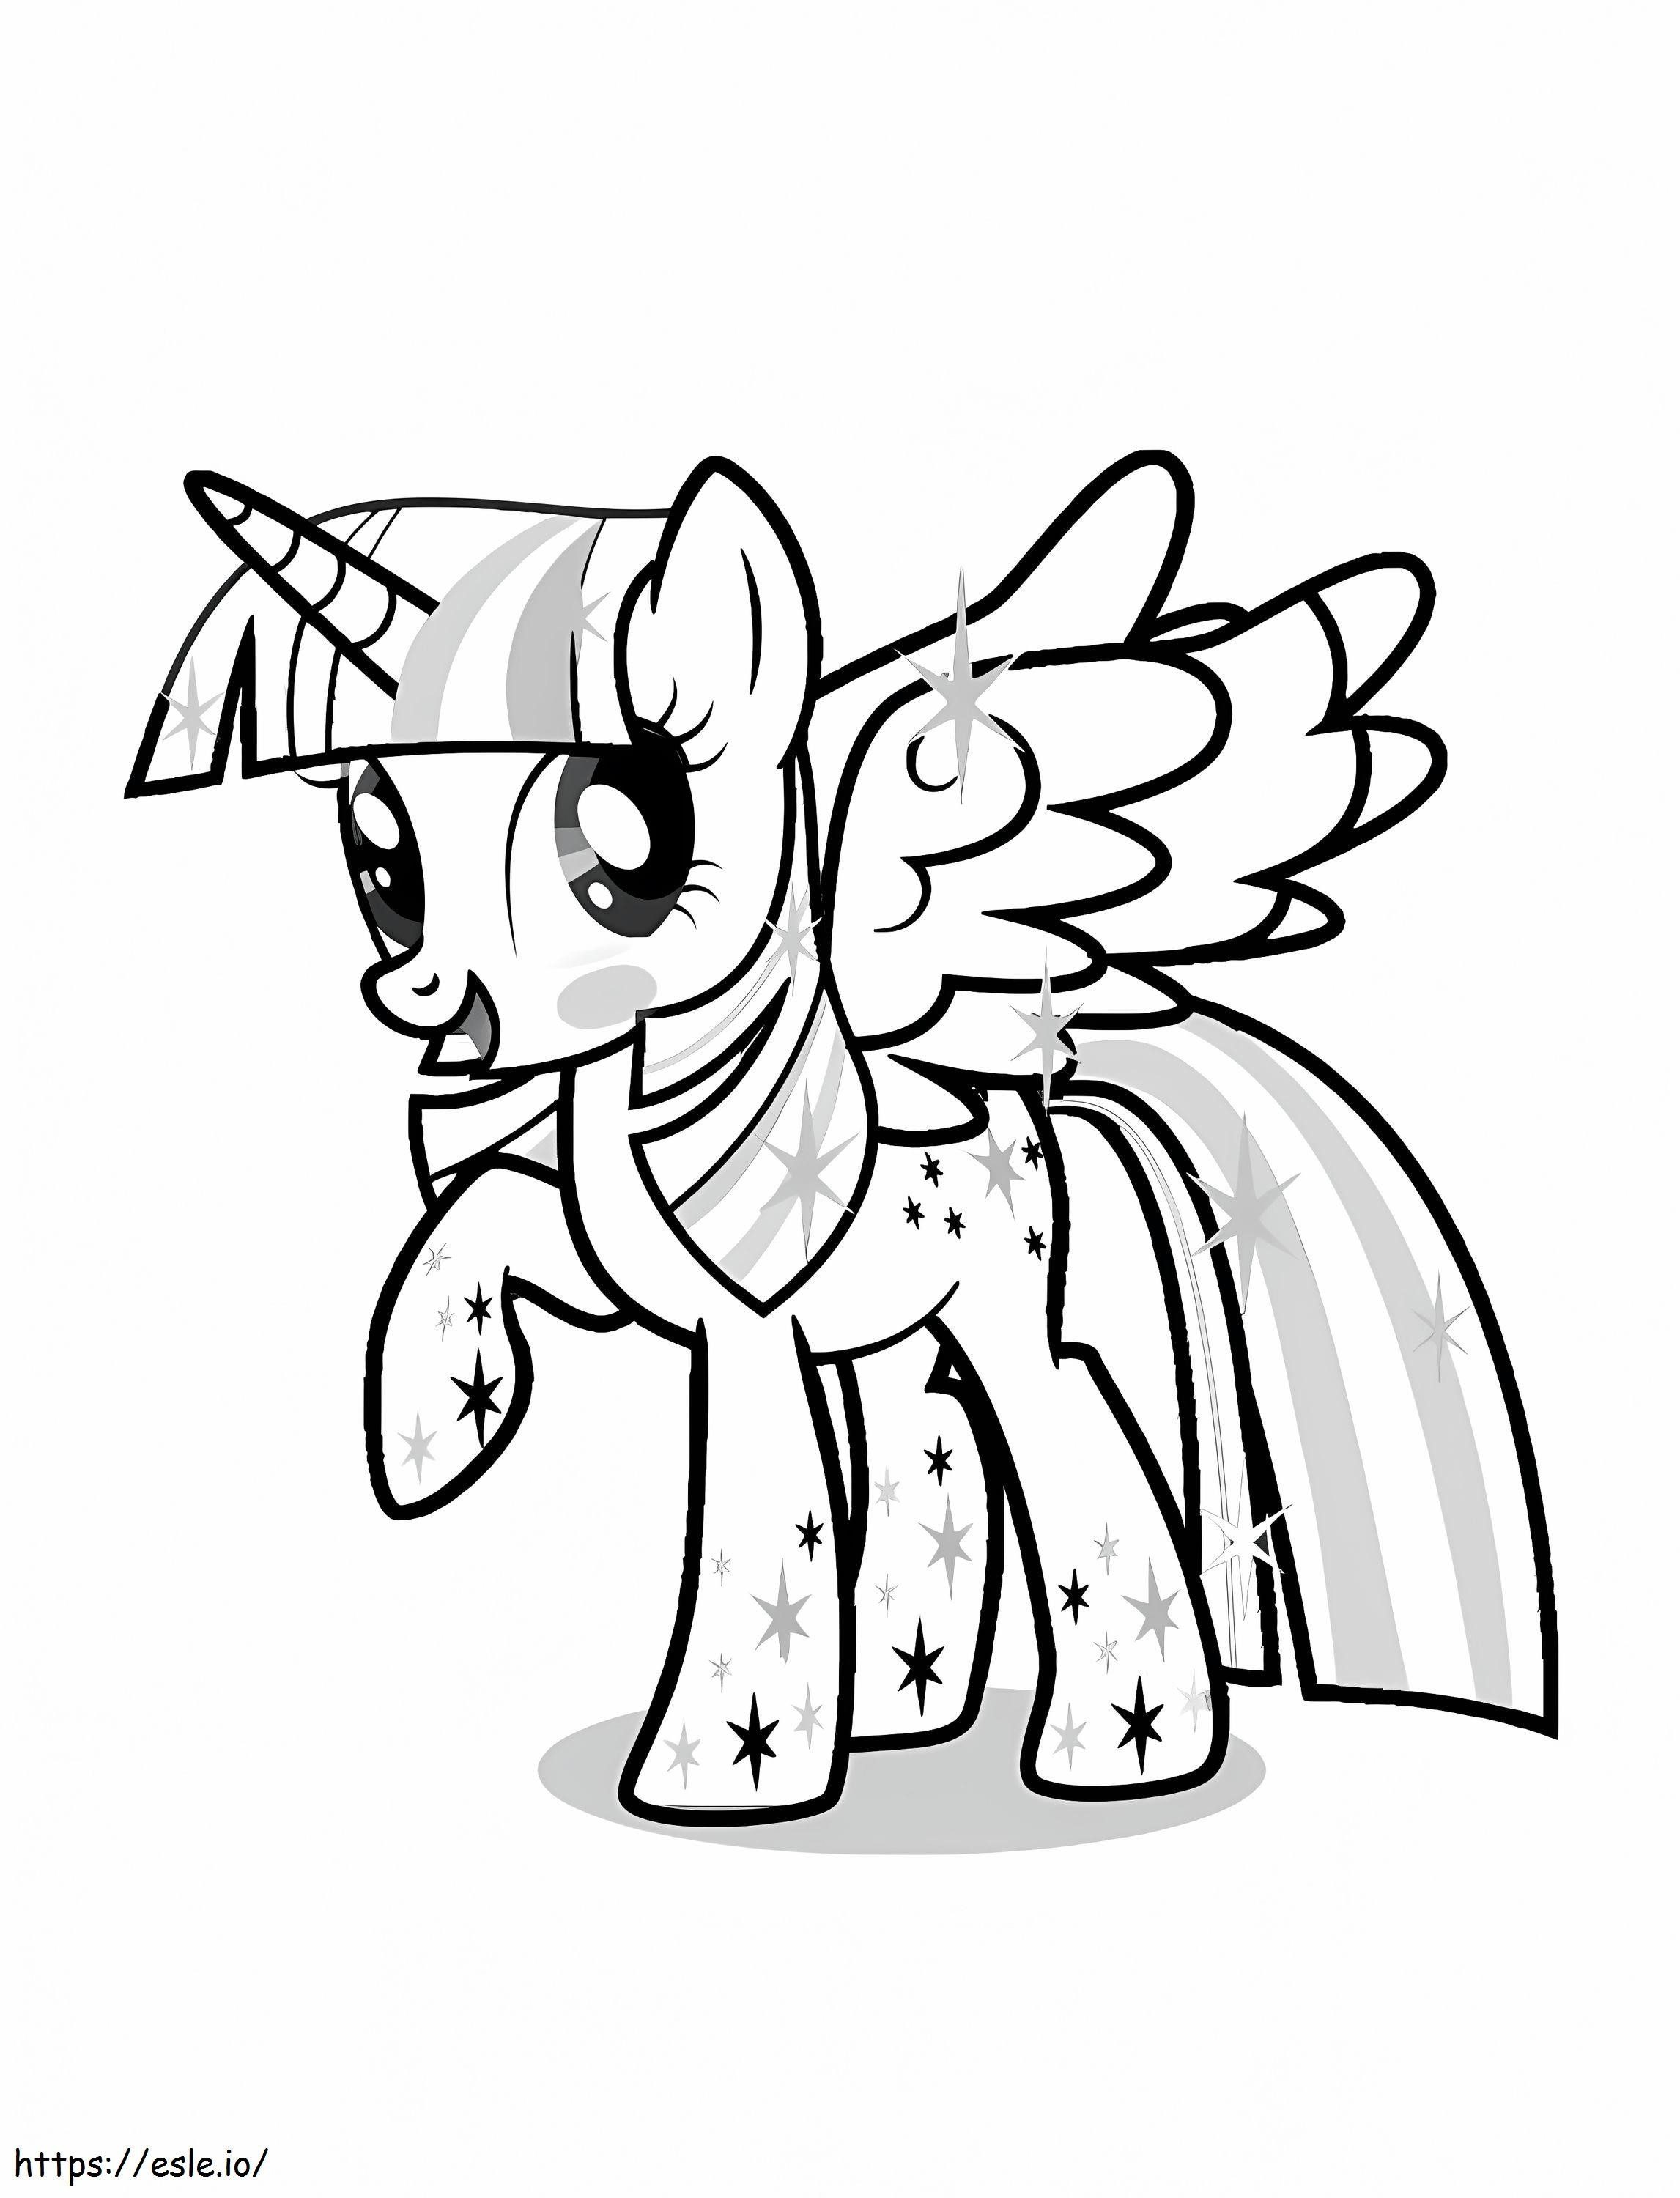 Free Twilight Sparkle Printable coloring page